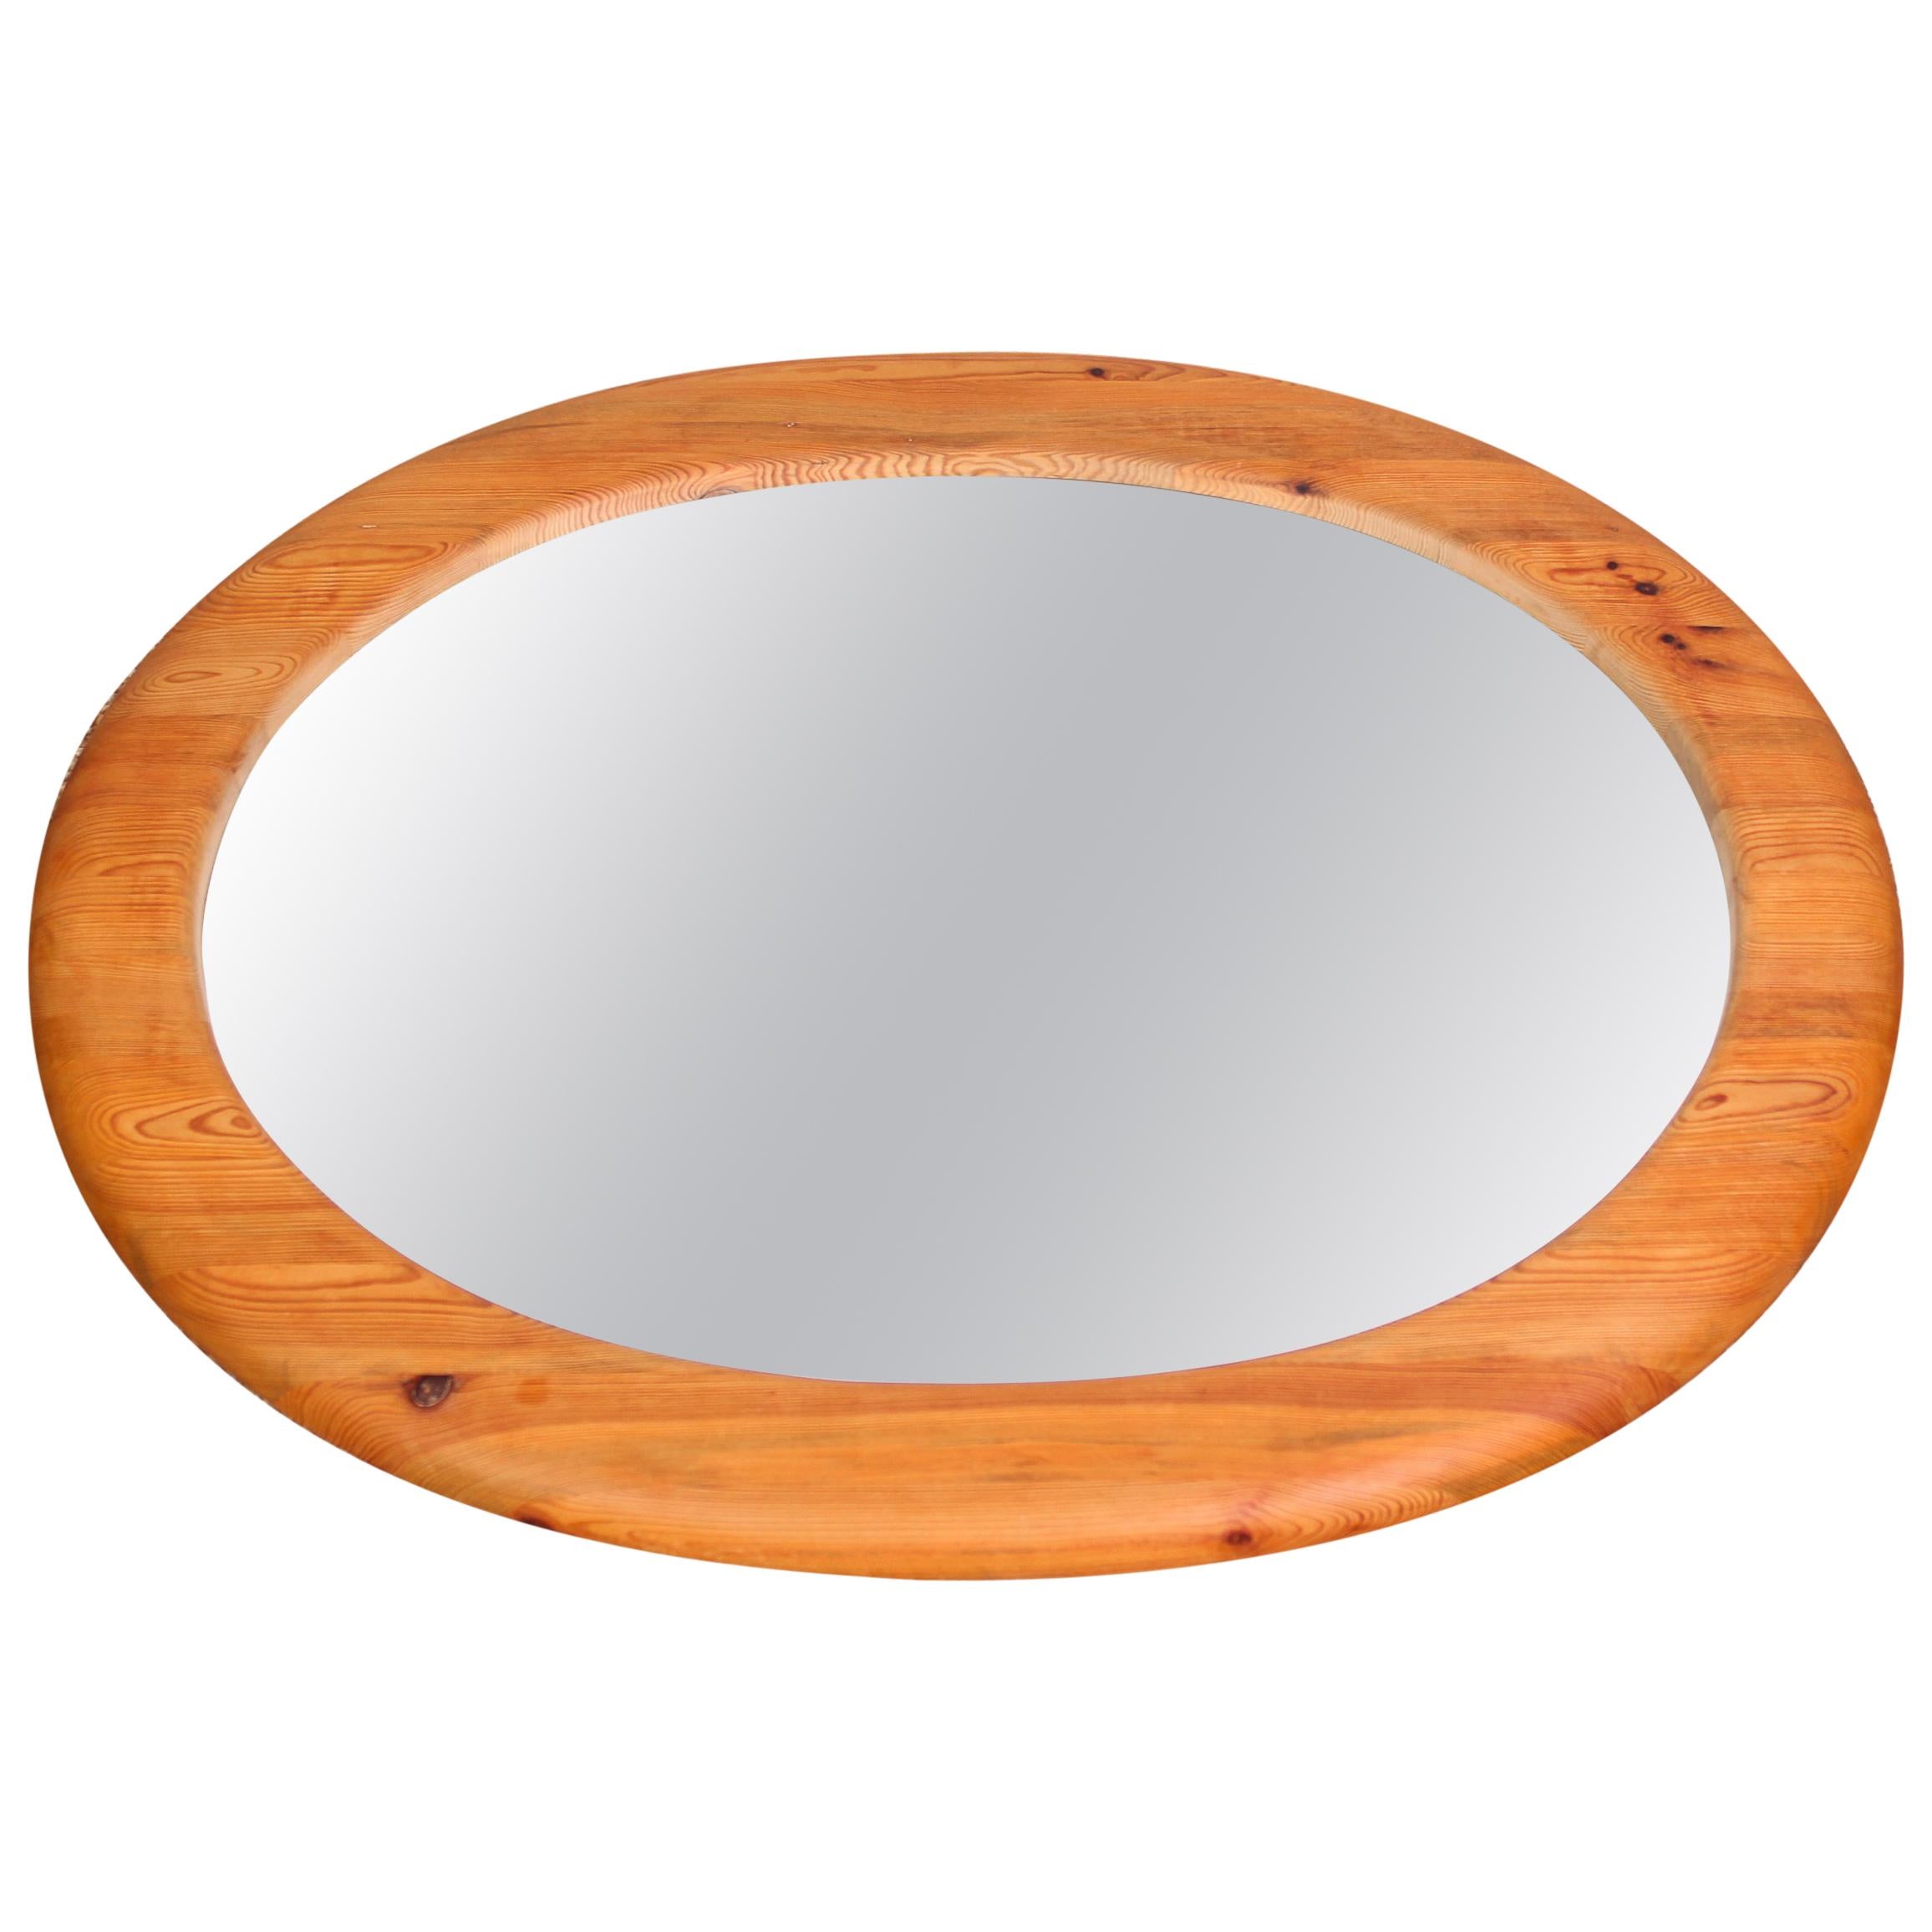 Midcentury Large Oval Solid Pine Mirror, Sweden, 1960s For Sale